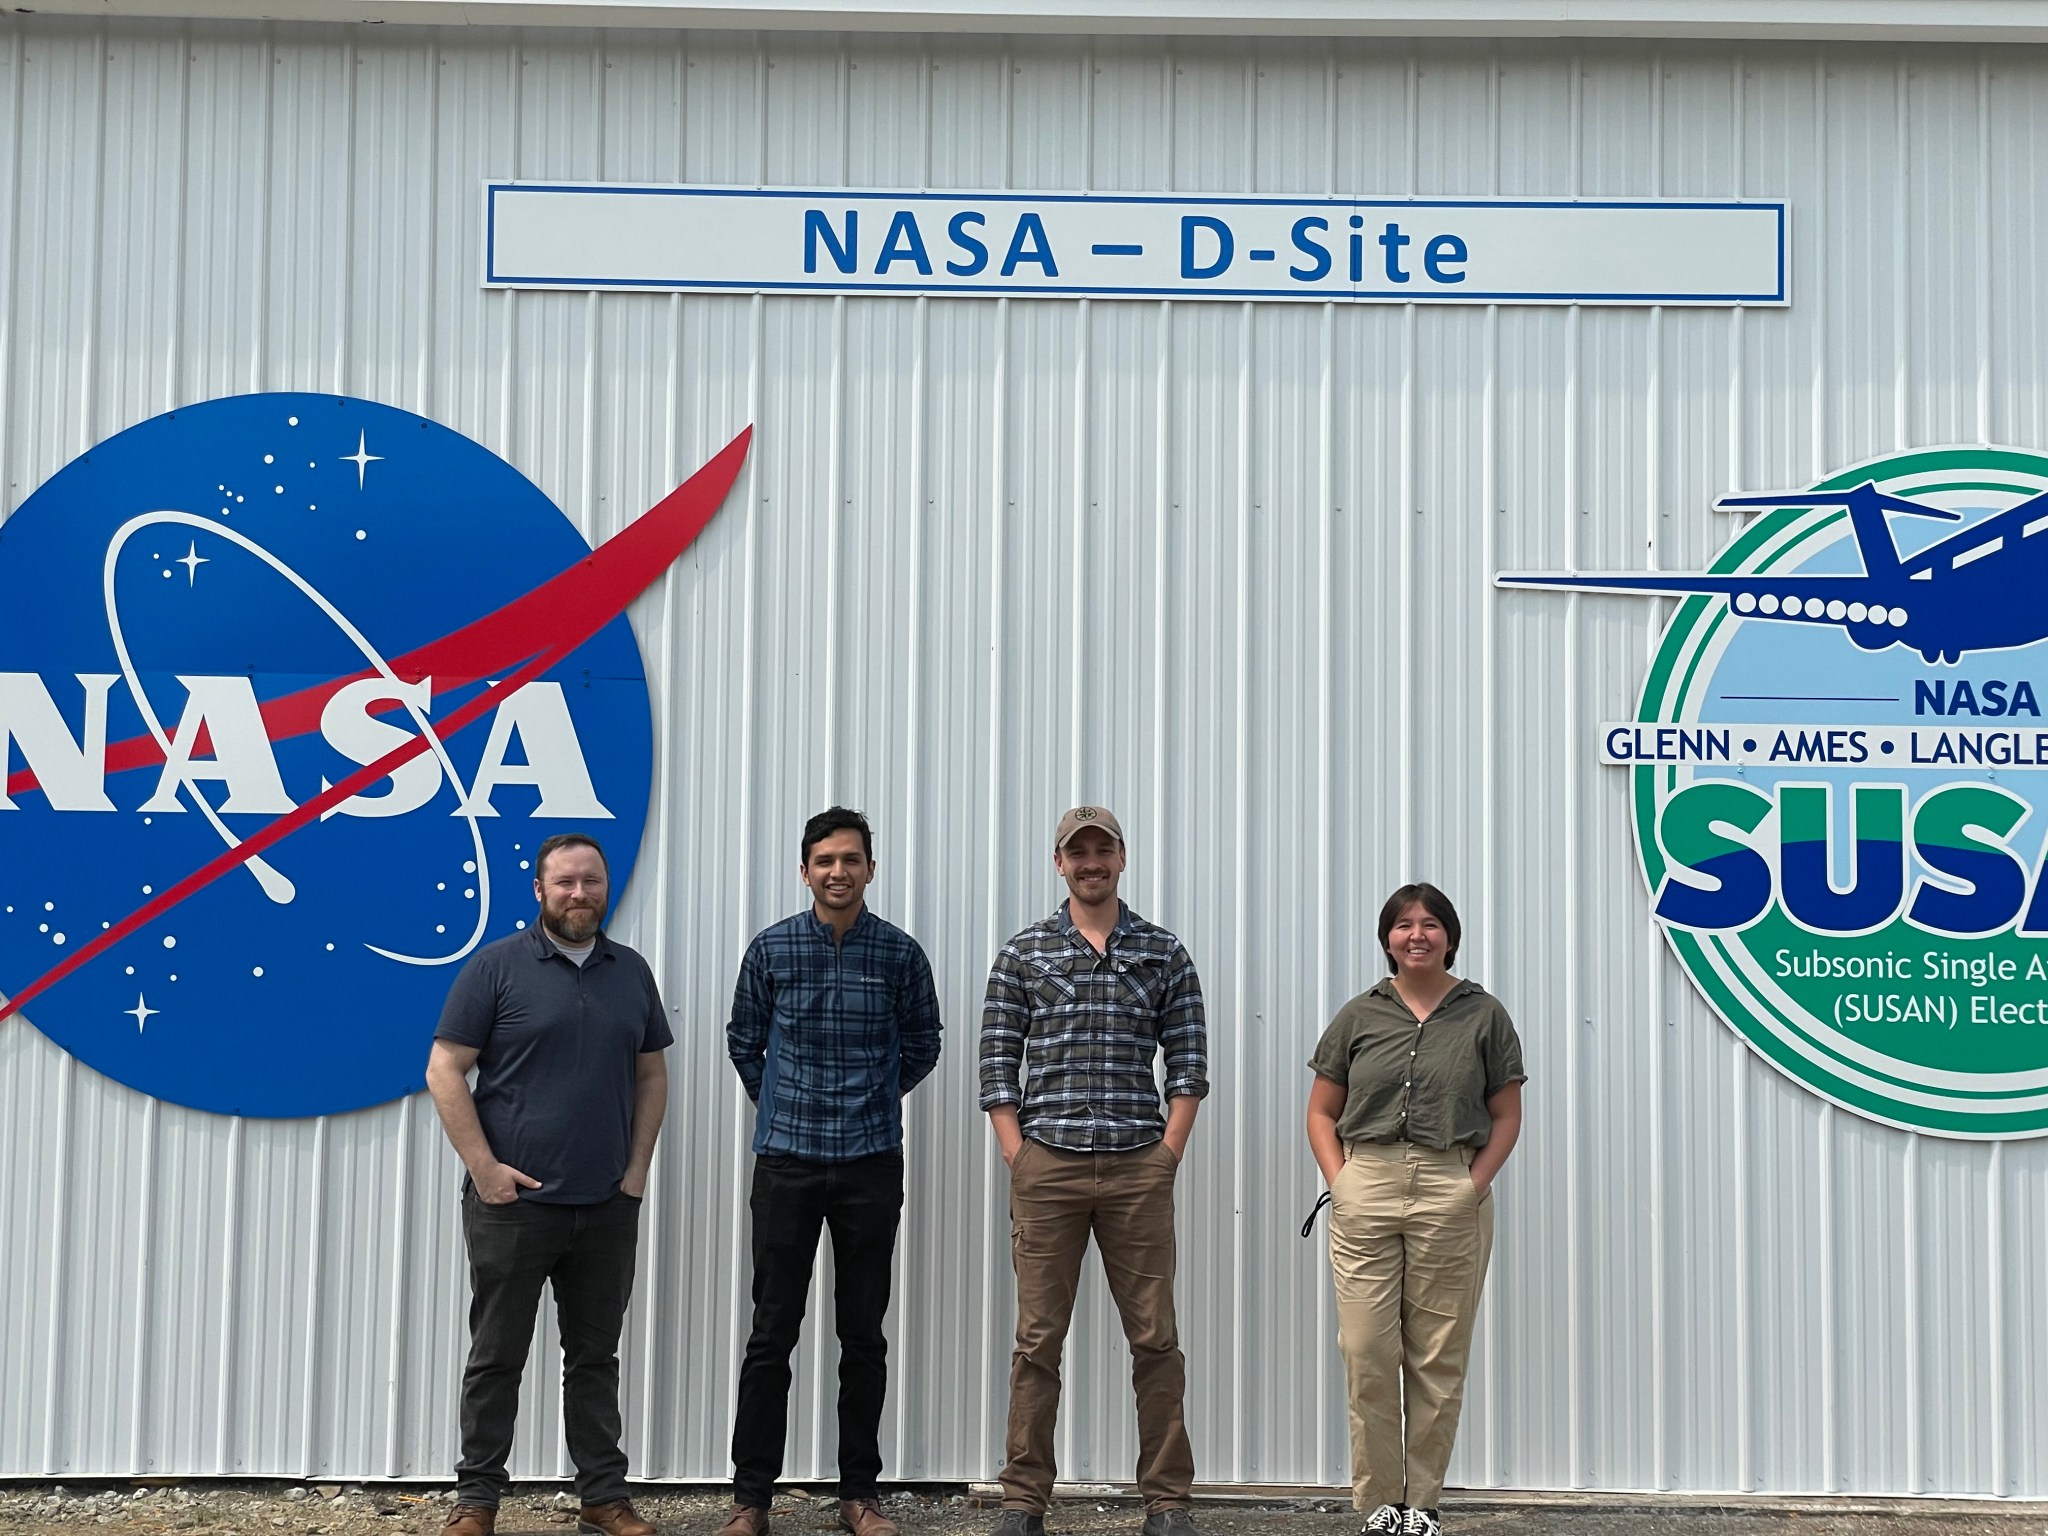 : A group of four students pose in front of a white metal building. On the side of the building is a NASA meatball logo, a sign that says, “NASA – D-site,” and a colorful SUSAN aircraft logo.